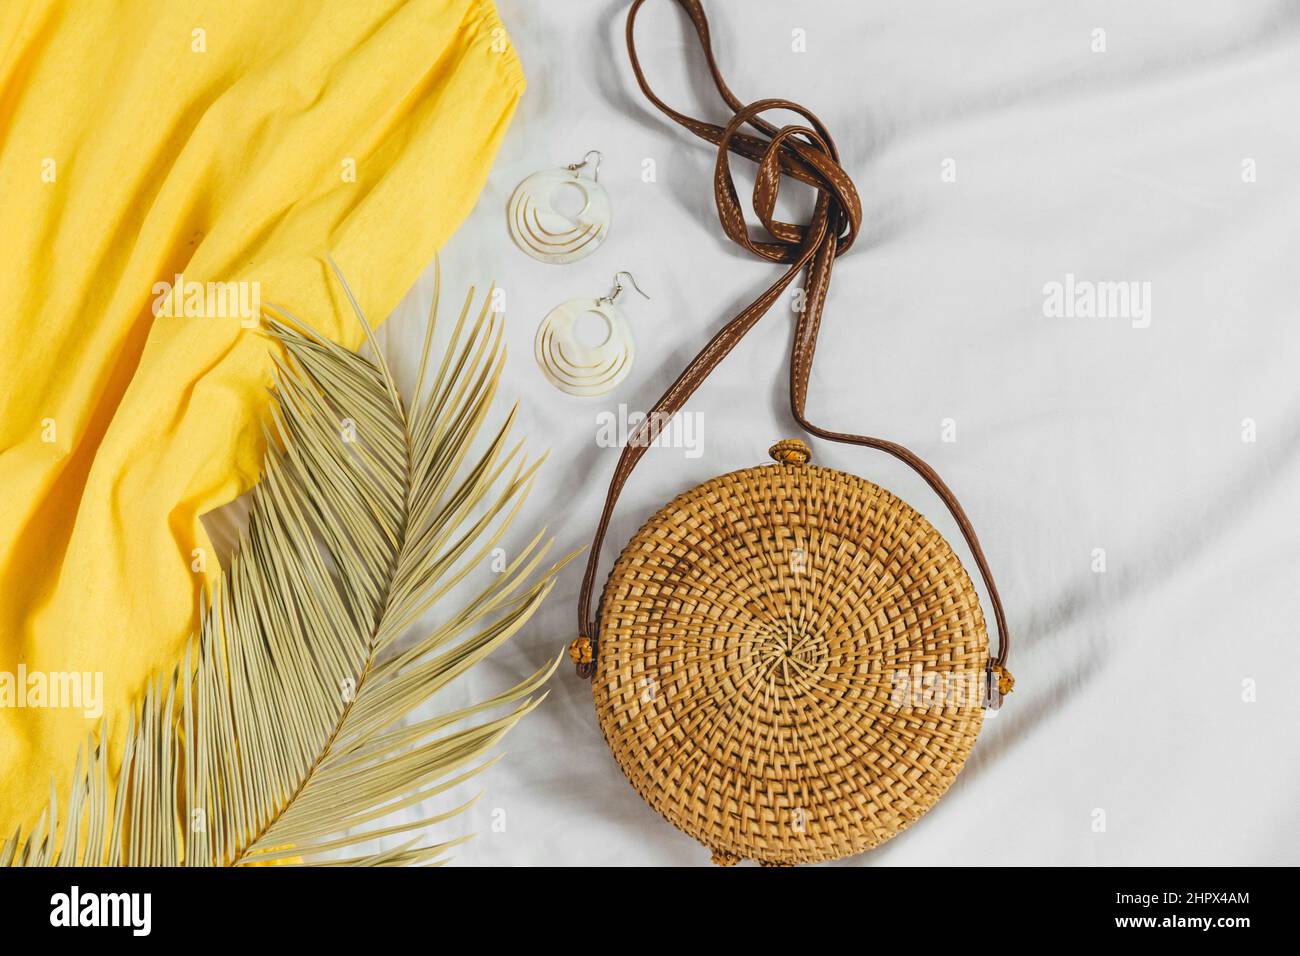 Straw hat, yellow dress, straw bag on white background. Trendy summer outfit. Flat lay with clothes for holidays and vacations. Stock Photo